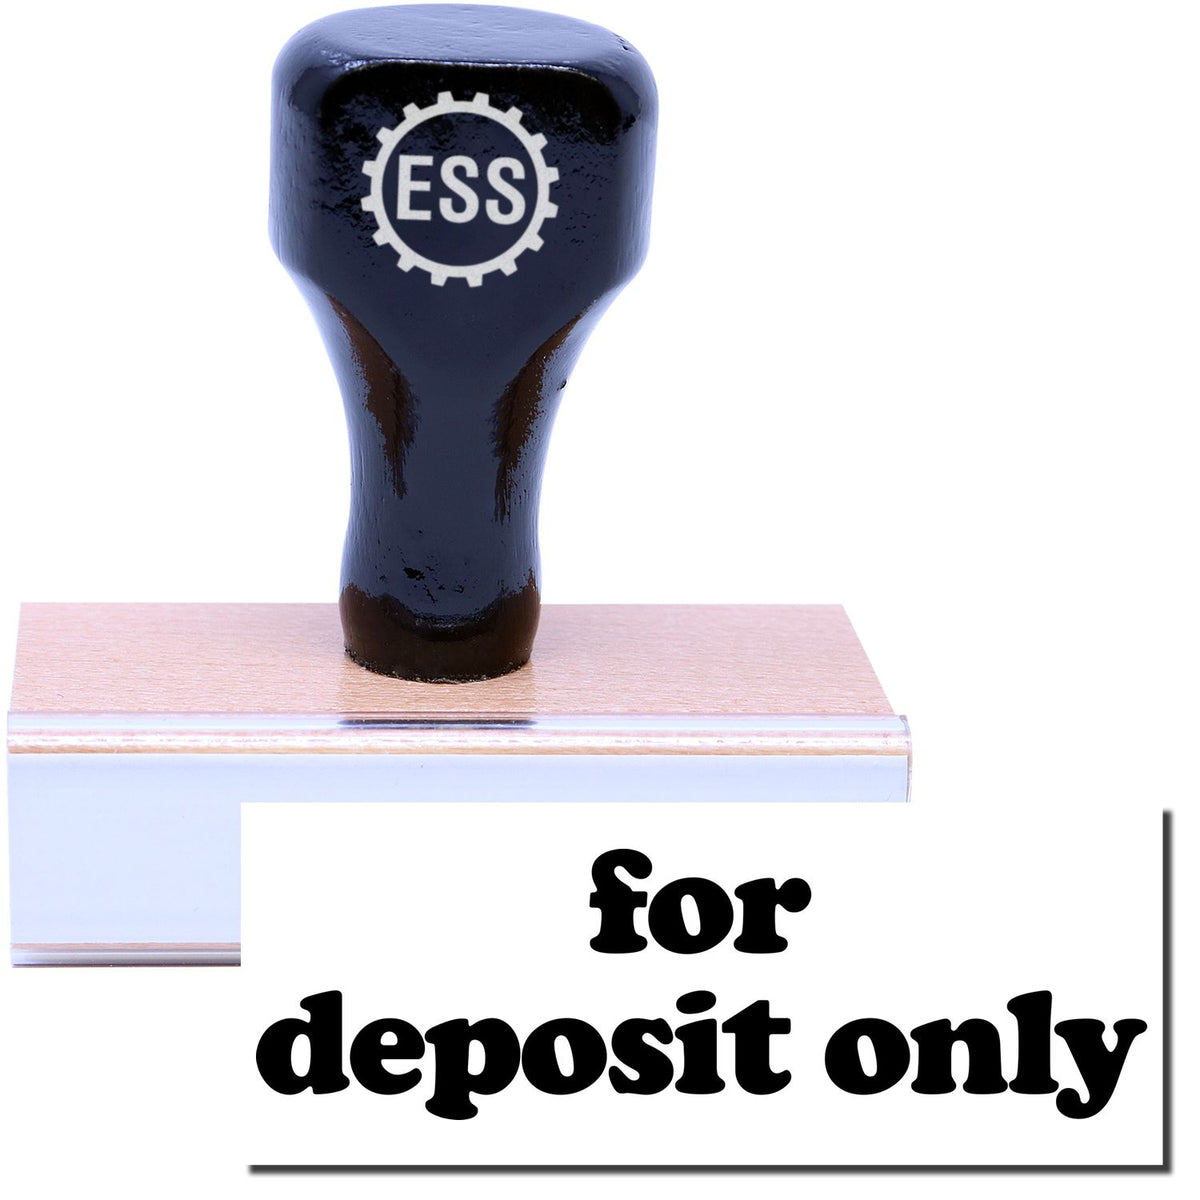 A stock office rubber stamp with a stamped image showing how the text &quot;for deposit only&quot; in lowercase letters is displayed after stamping.